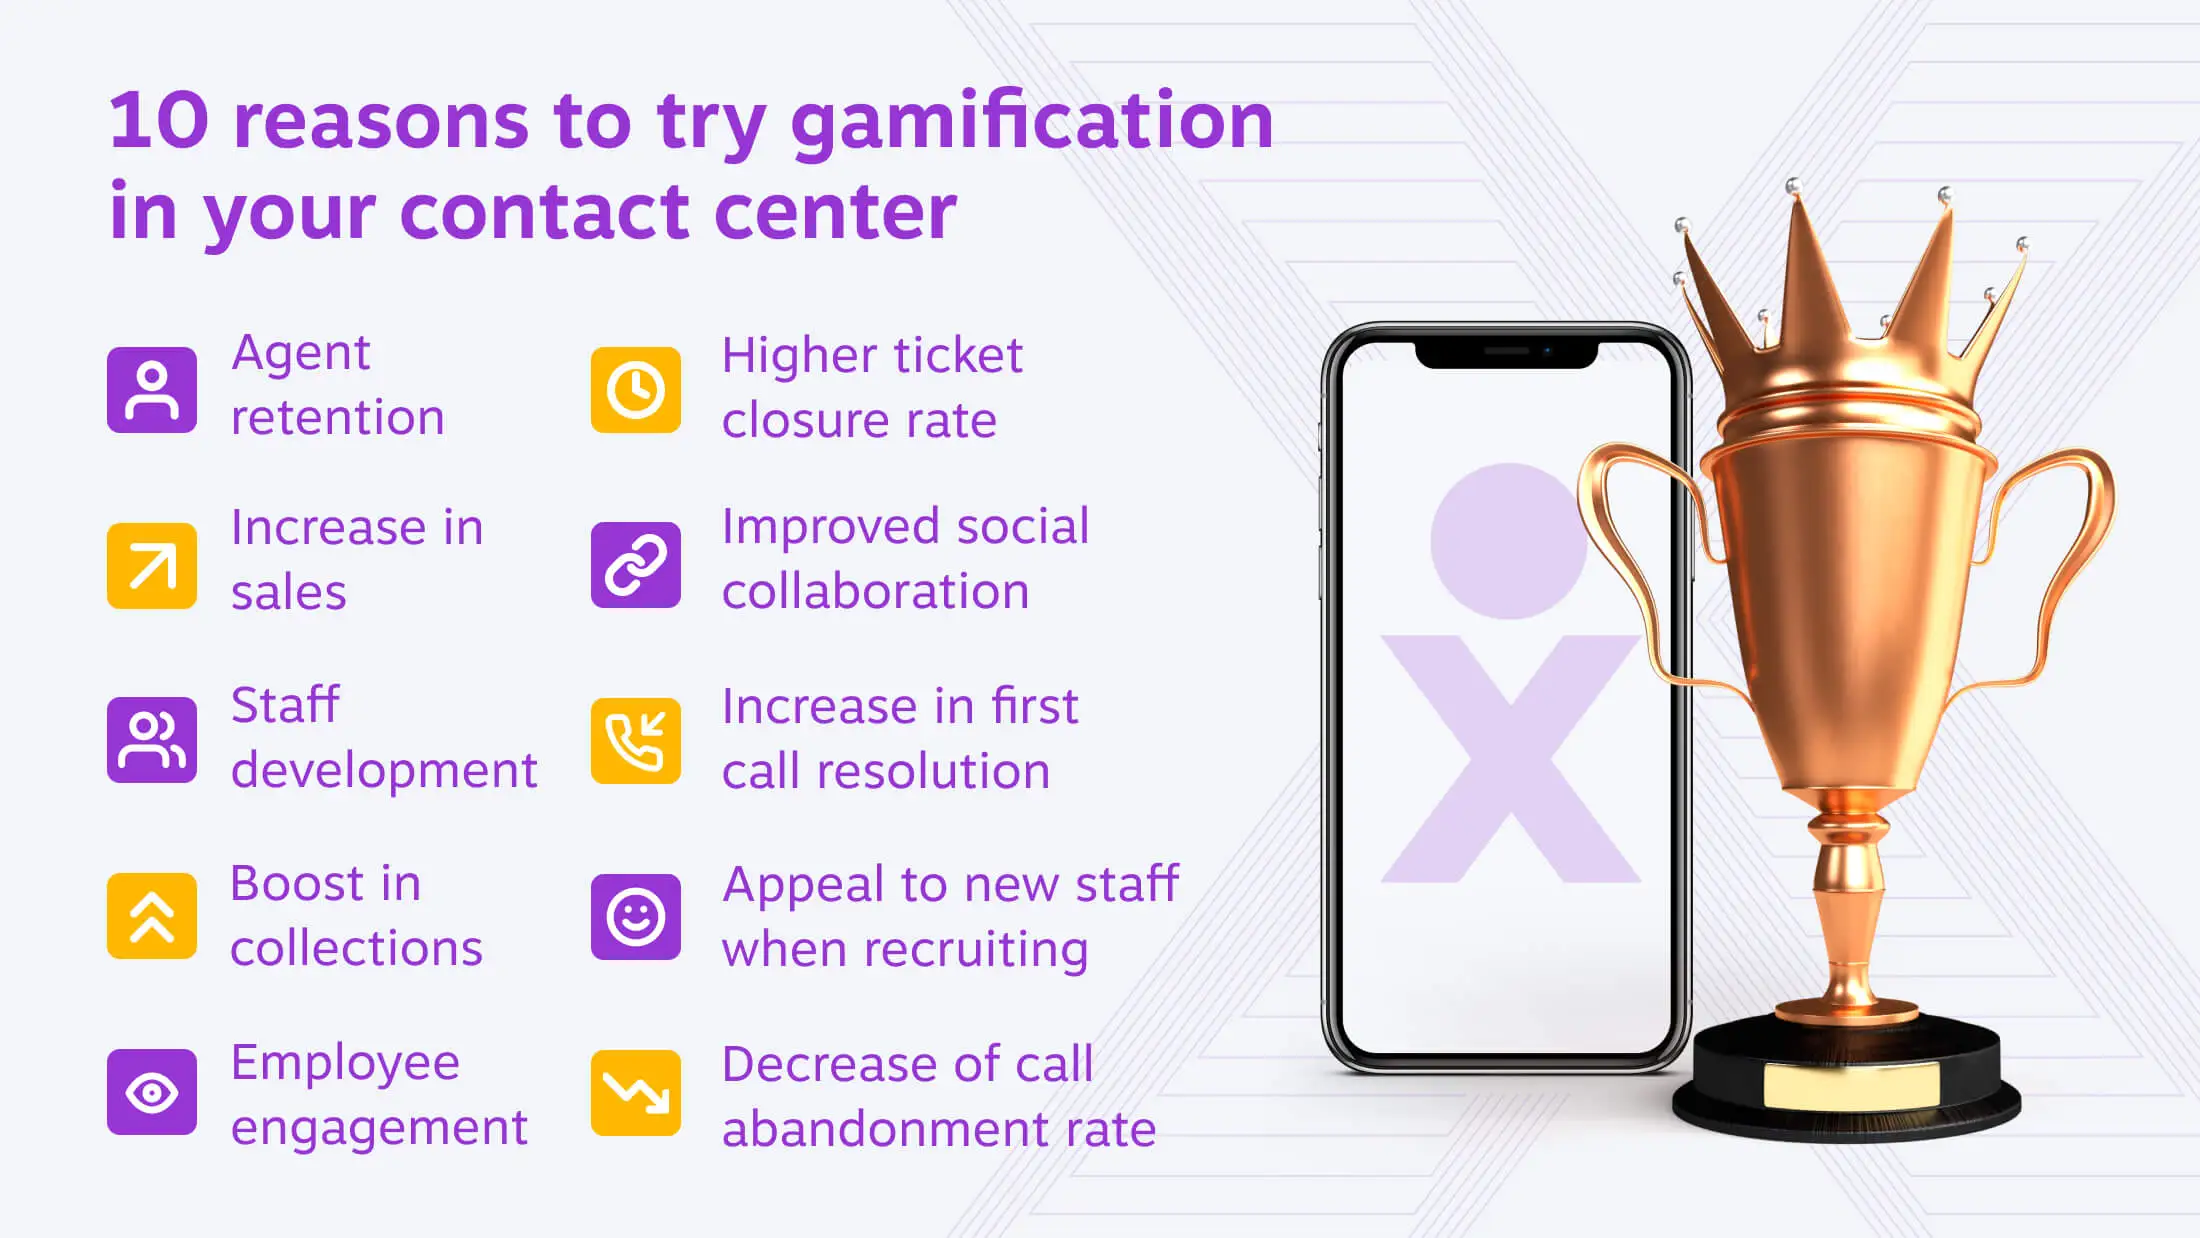 10 reasons to try gamification in your contact center